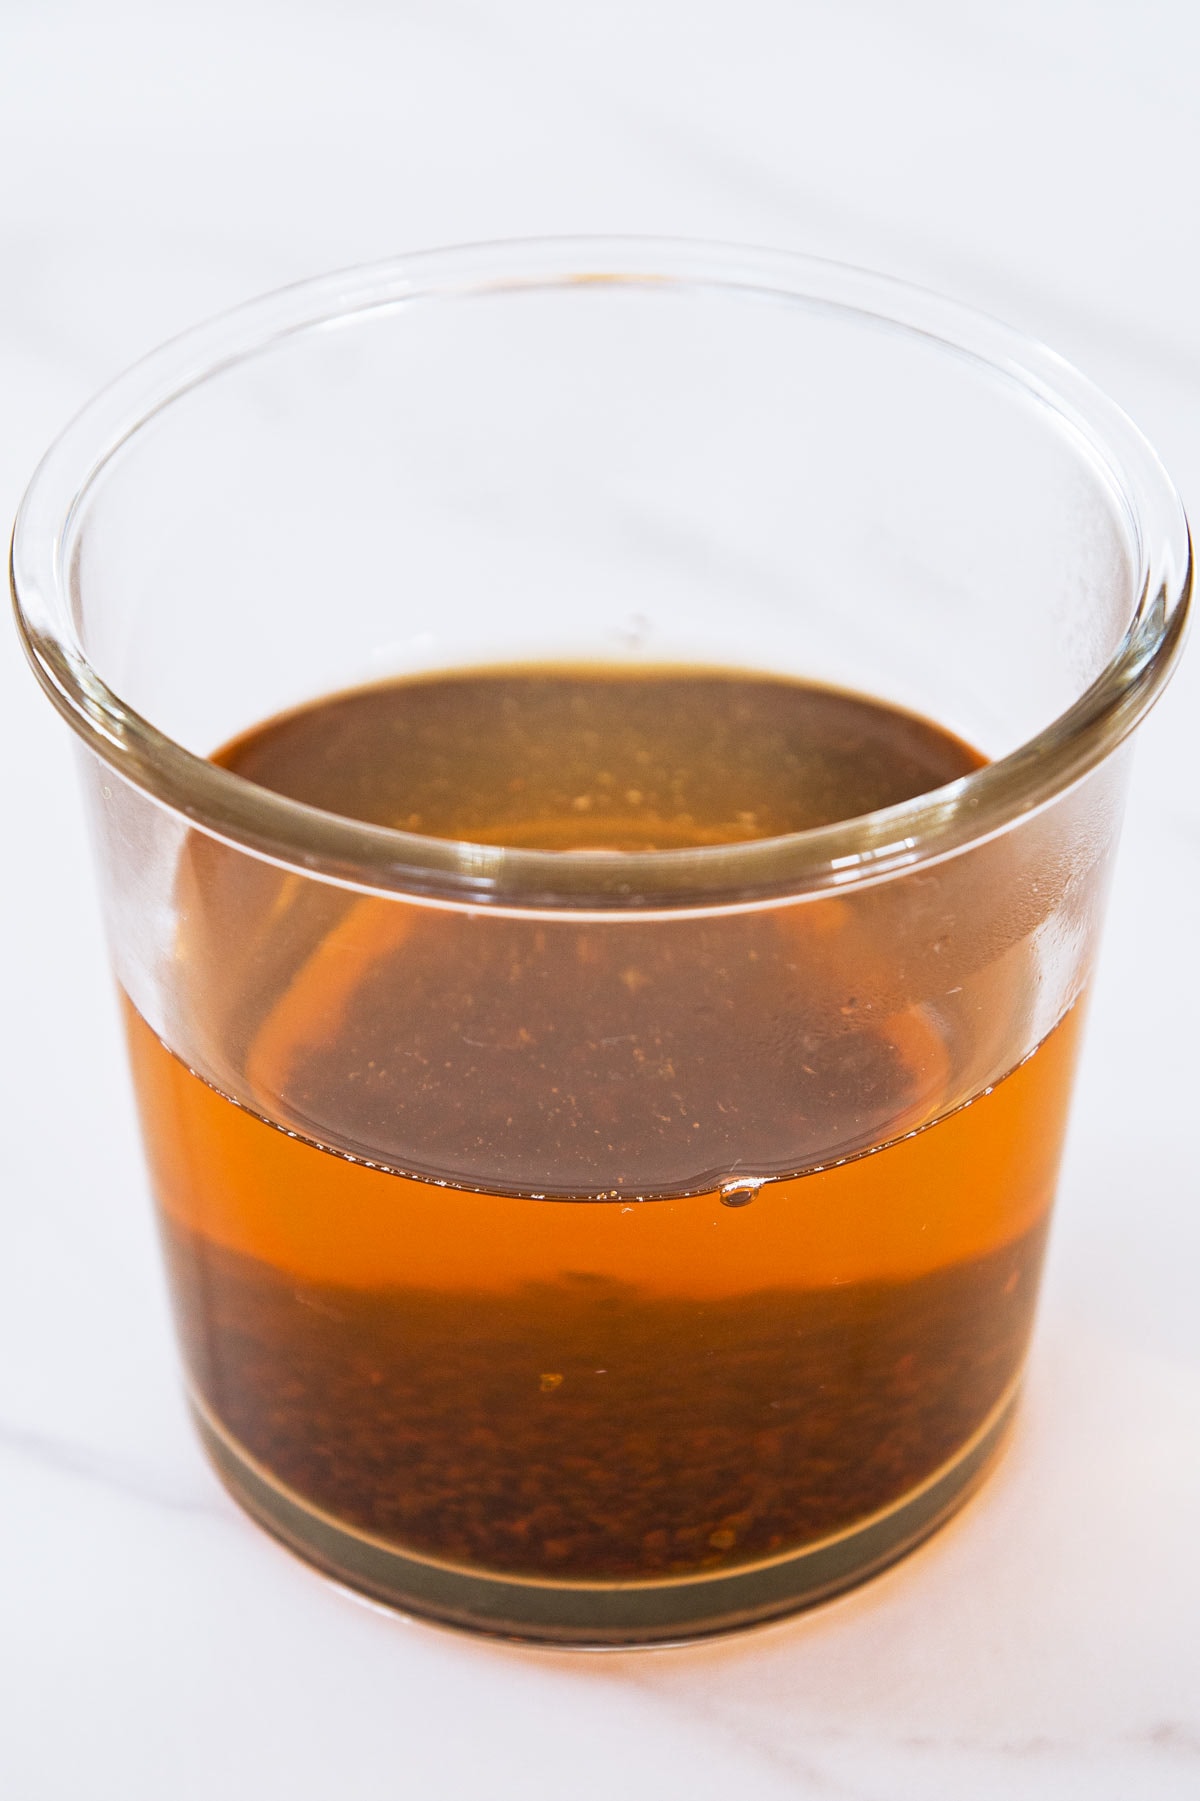 Strong sweet black tea with tea leaves at bottom in a glass